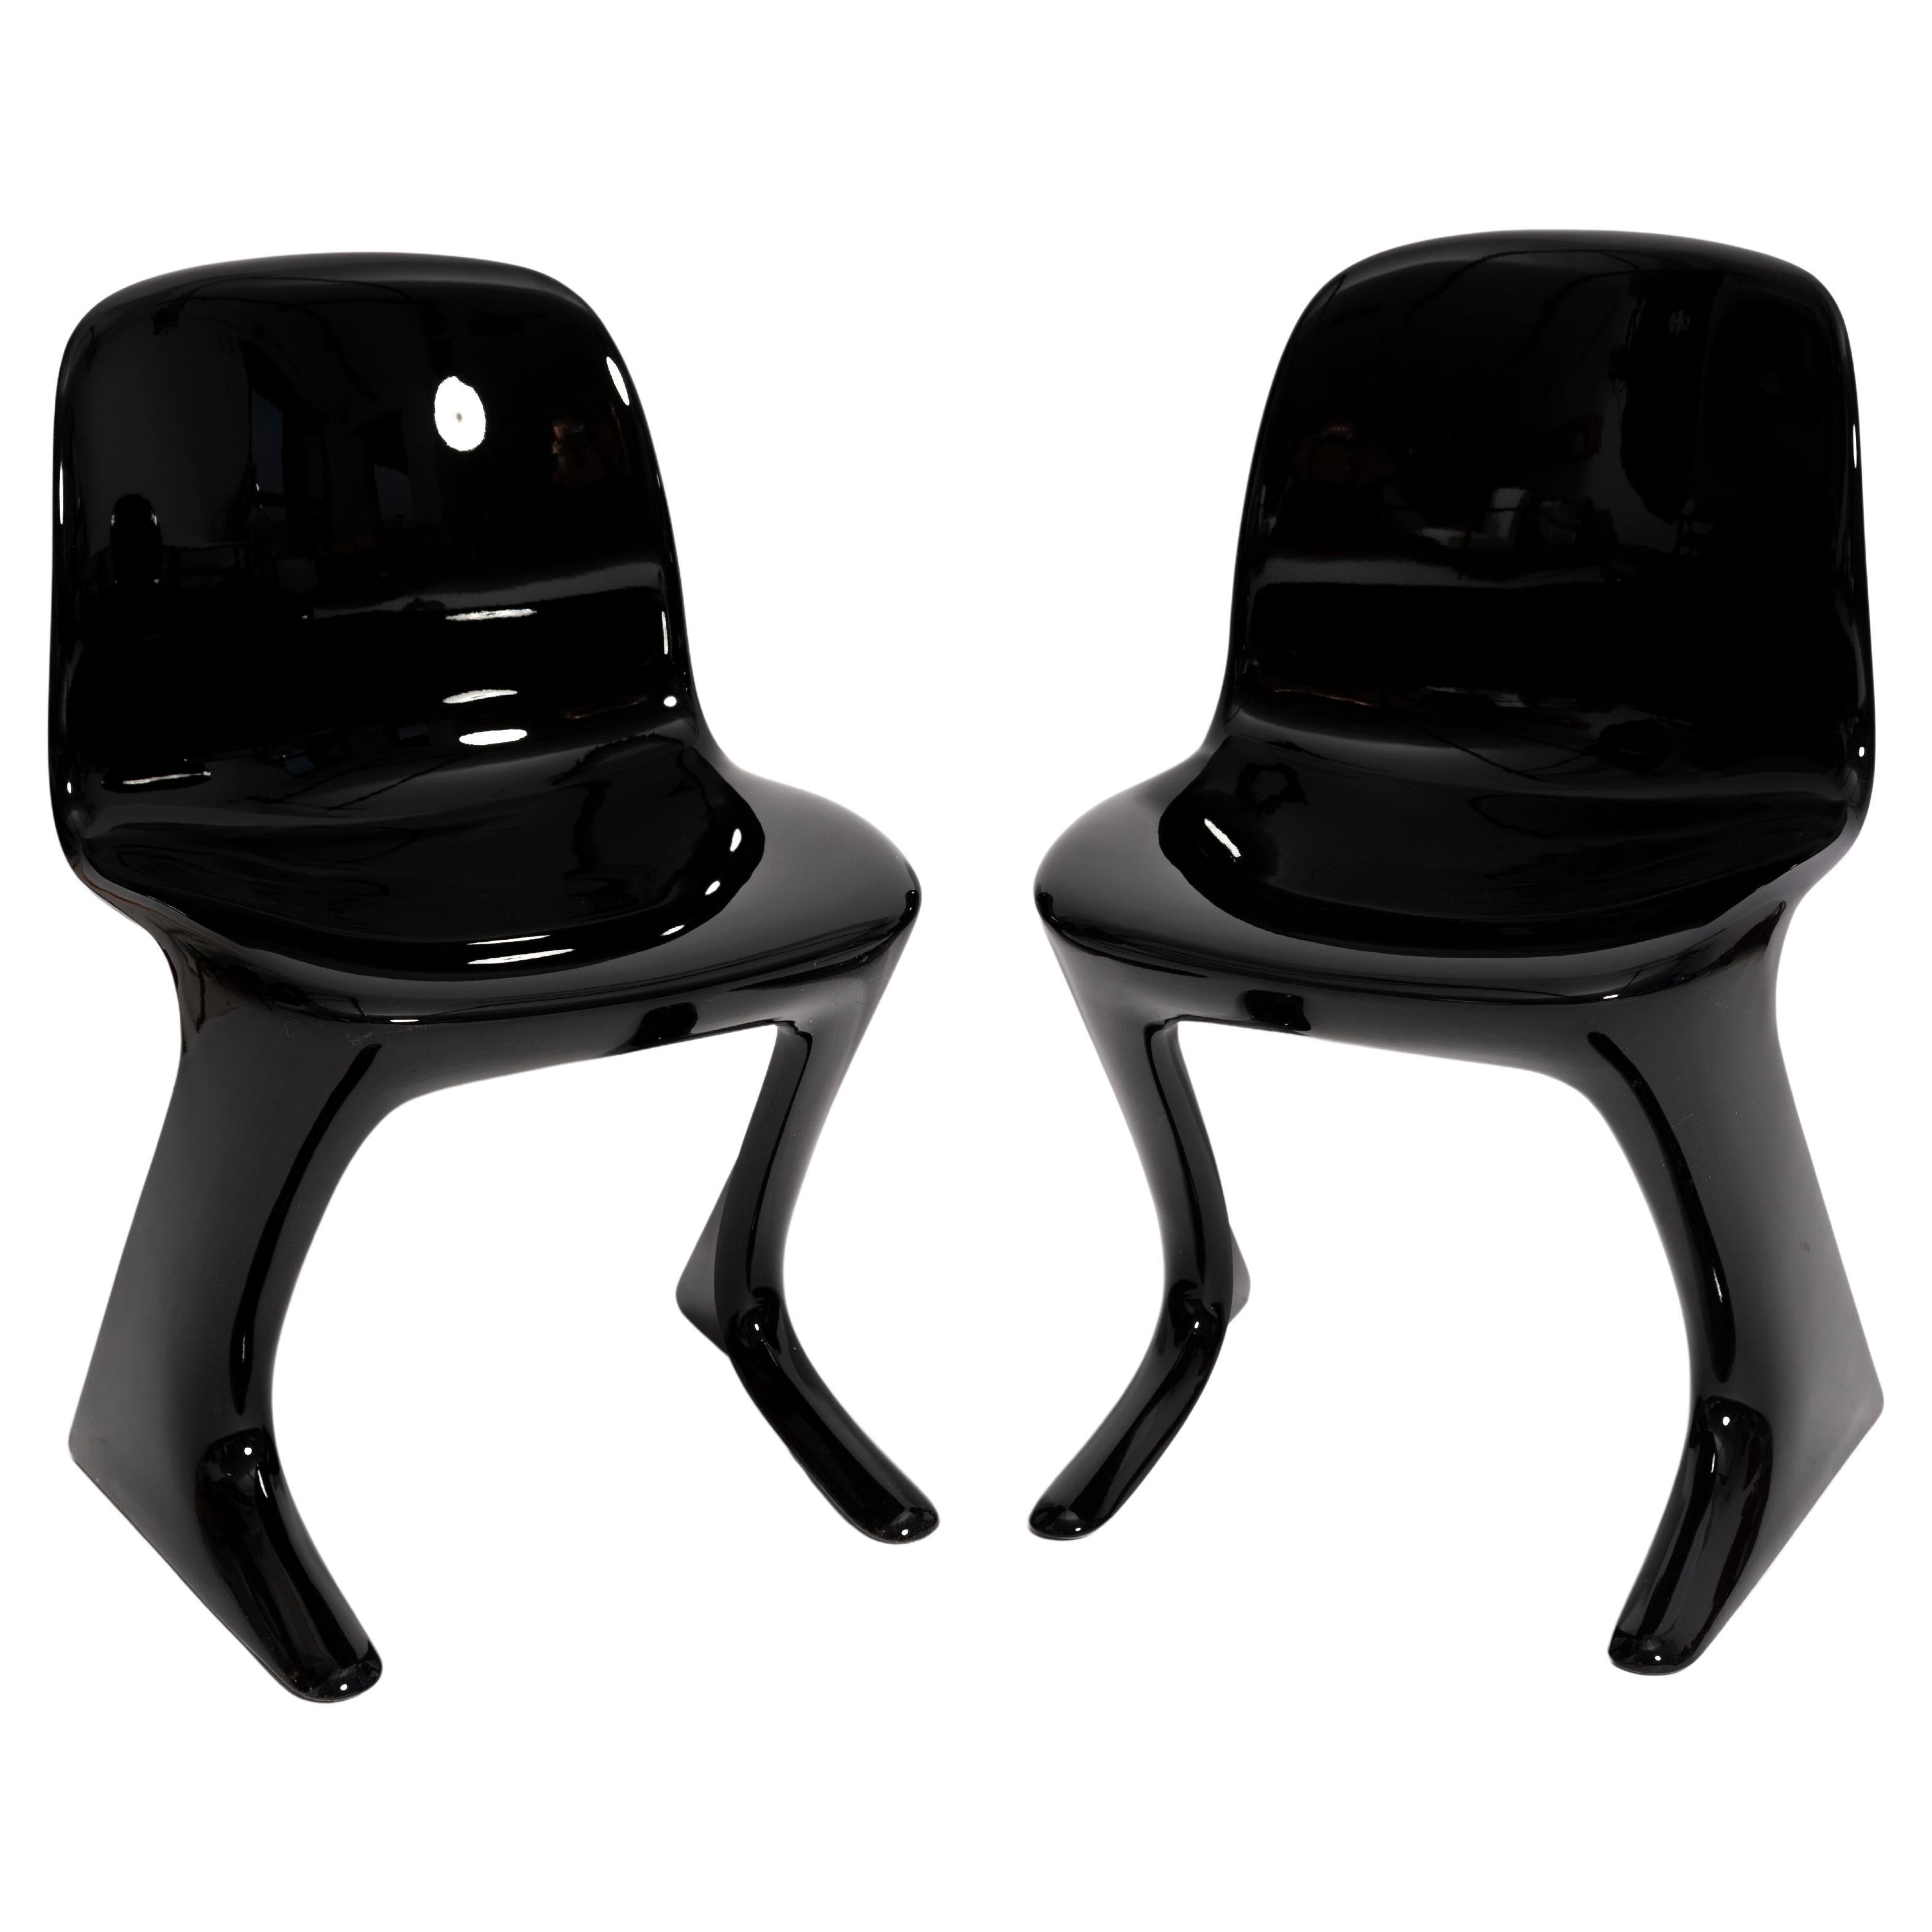 Two Mid-Century Black Kangaroo Chairs Designed by Ernst Moeckl, Germany, 1960s For Sale